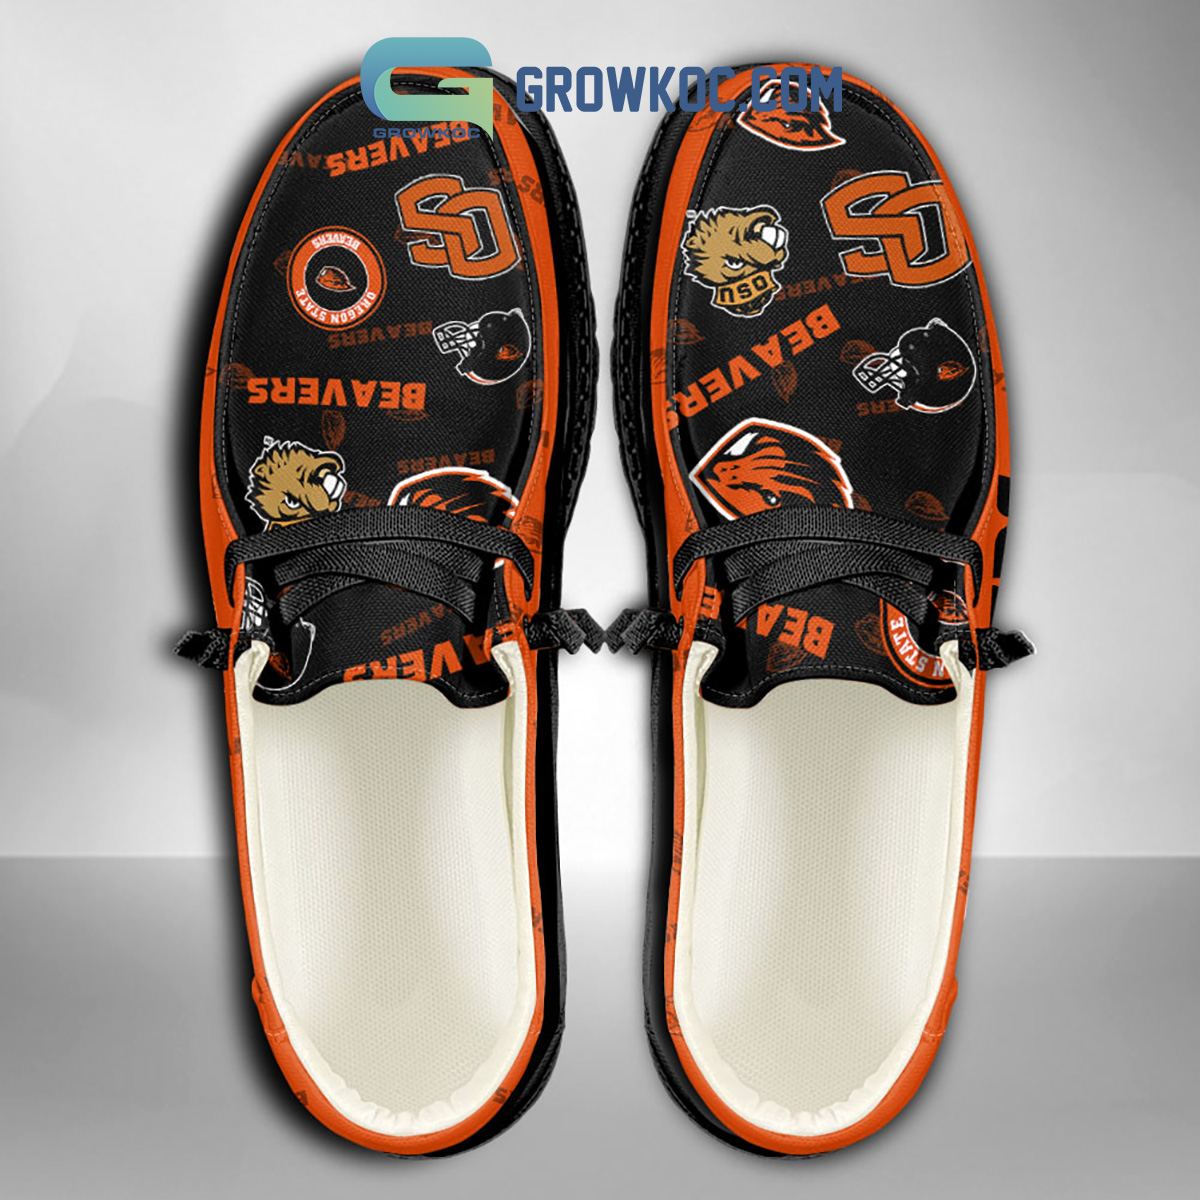 Oregon State Beavers Supporters Gift Merry Christmas Custom Name Hey Dude Shoes